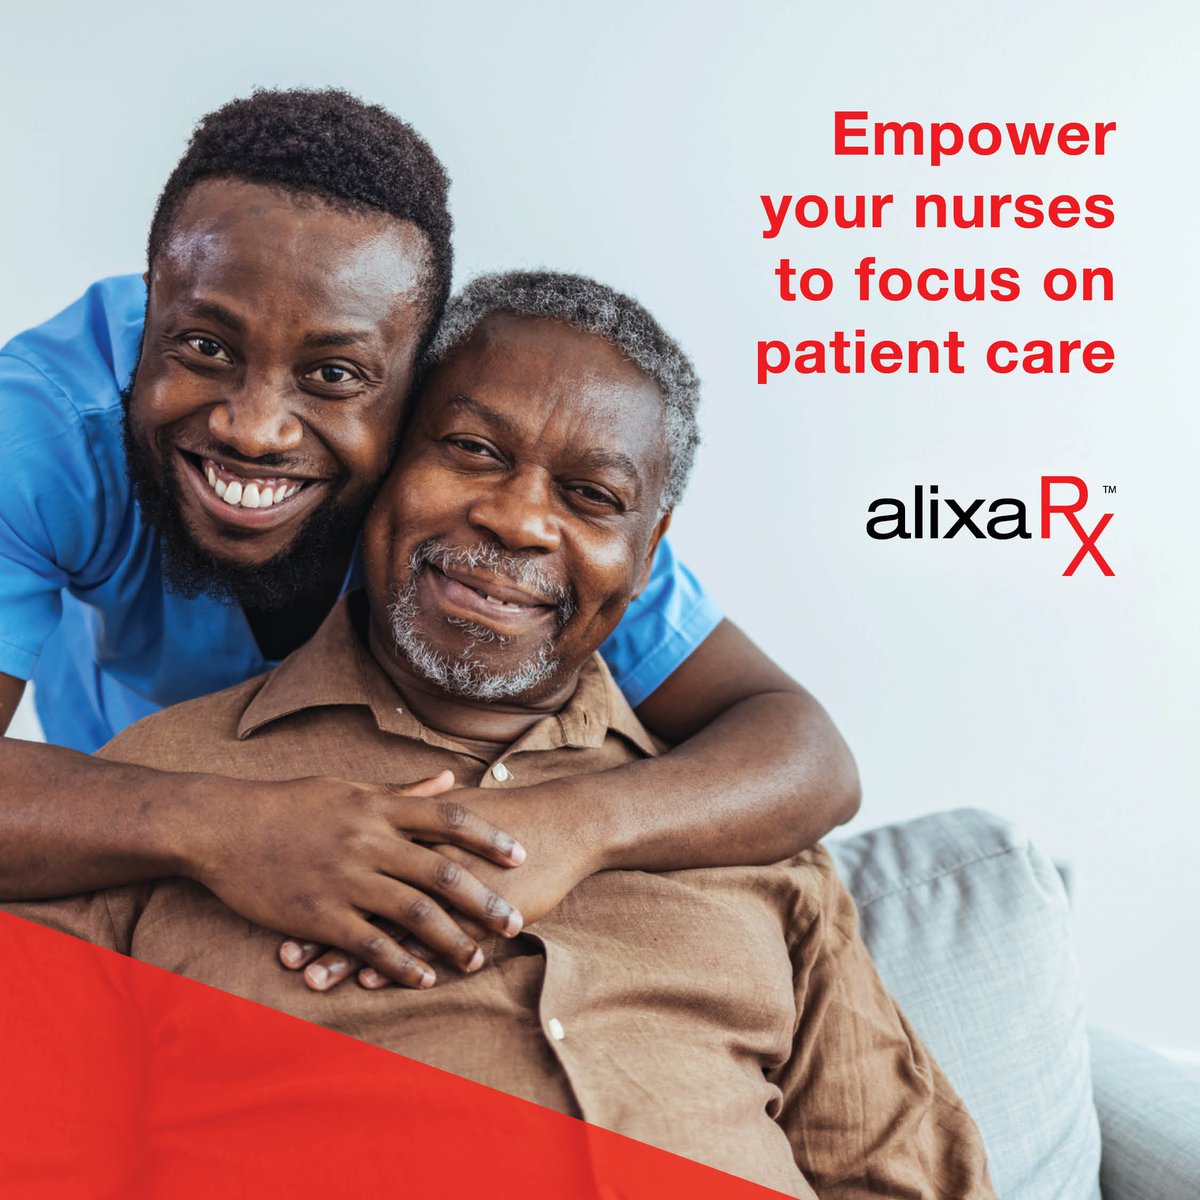 AlixaRx helps streamline your pharmacy needs, ensuring efficient and timely medication delivery.

Find out more:
AlixaRx.com

#AlixaRx #PatientCentered #PharmacyServices